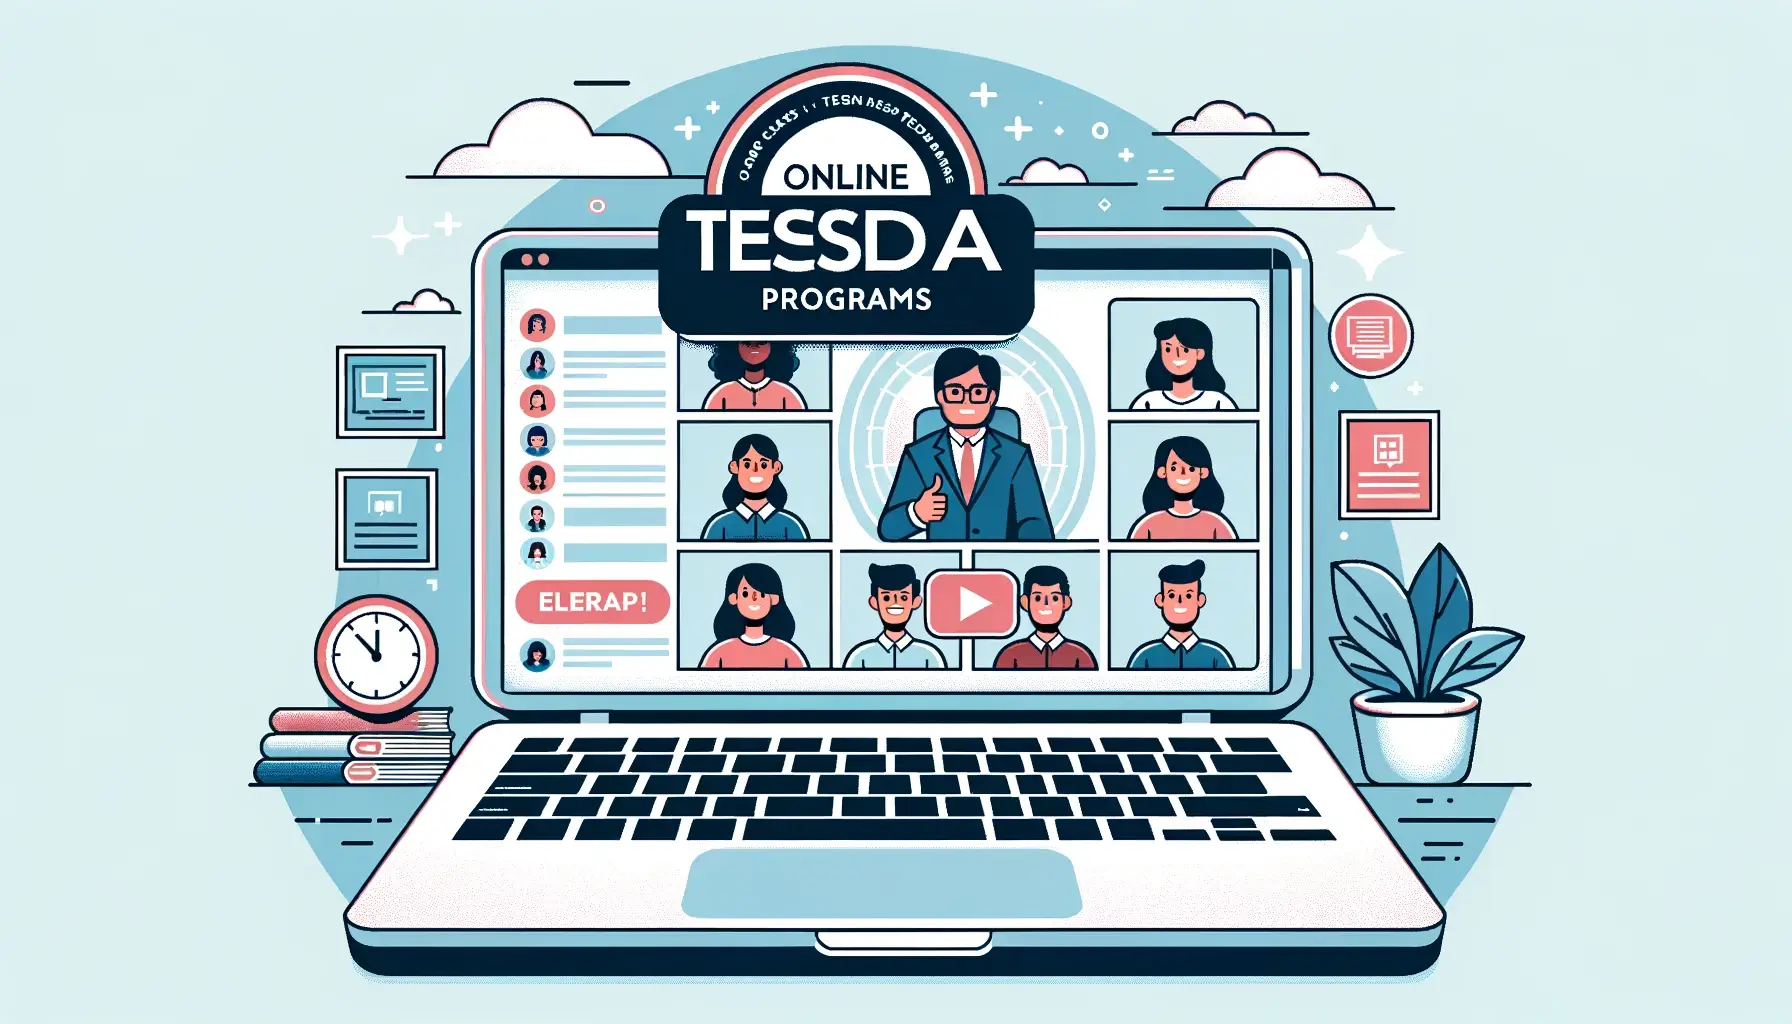 laptop screen displaying an online class interface, with students' avatars and a teacher's live video feed. The words 'Online TESDA Programs' are prominently displayed at the top with a circular emblem on one side